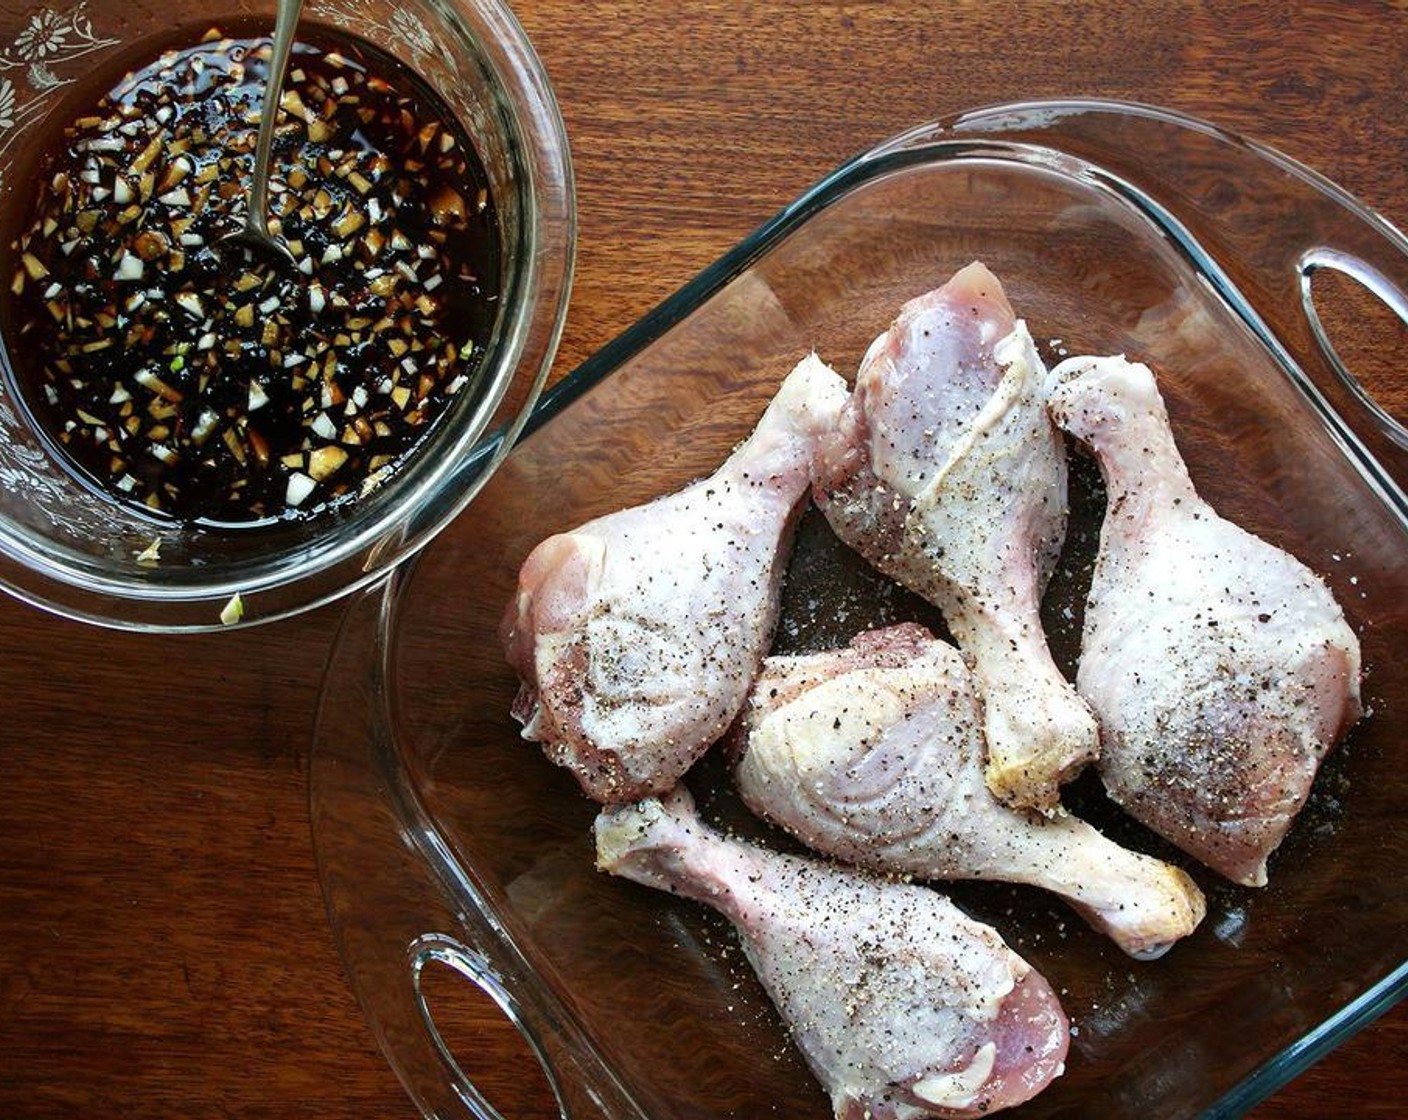 step 2 Wash and dry the Chicken Drumsticks (12 pieces). If using wings, cut off the wingtips. Transfer chicken to a rimmed baking sheet, a 9x13-inch pan, or an 8-inch square pan, depending on how much chicken you are using. Season lightly with Kosher Salt (to taste) and Freshly Ground Black Pepper (to taste).